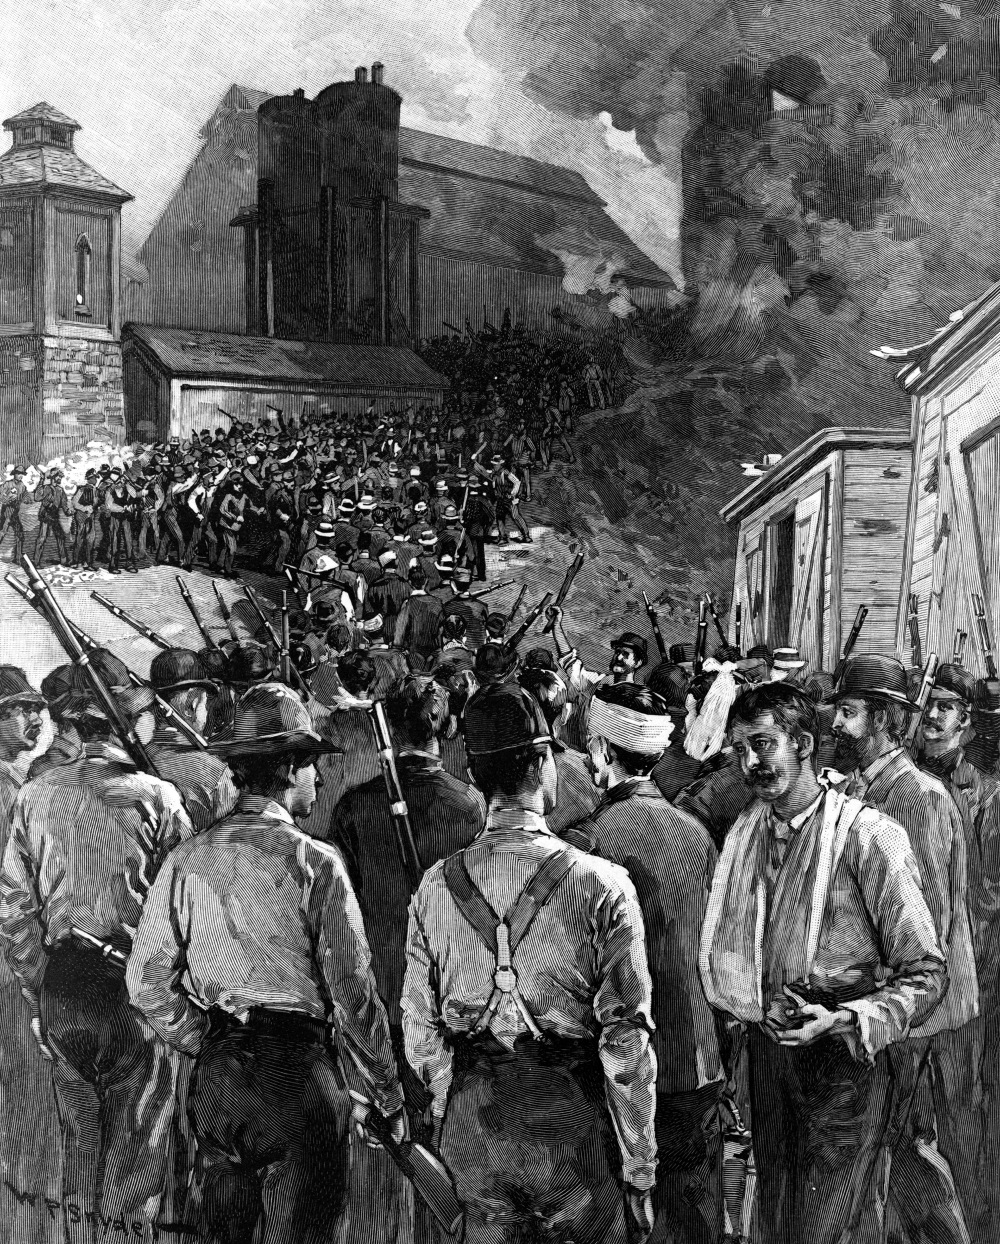 An 1892 cover of Harper's Weekly depicting the Homestead Riot, showed Pinkerton men who had surrendered to the steel mill workers navigating a gauntlet of violent strikers. W.P. Snyder (artist) after a photograph by Dabbs, 